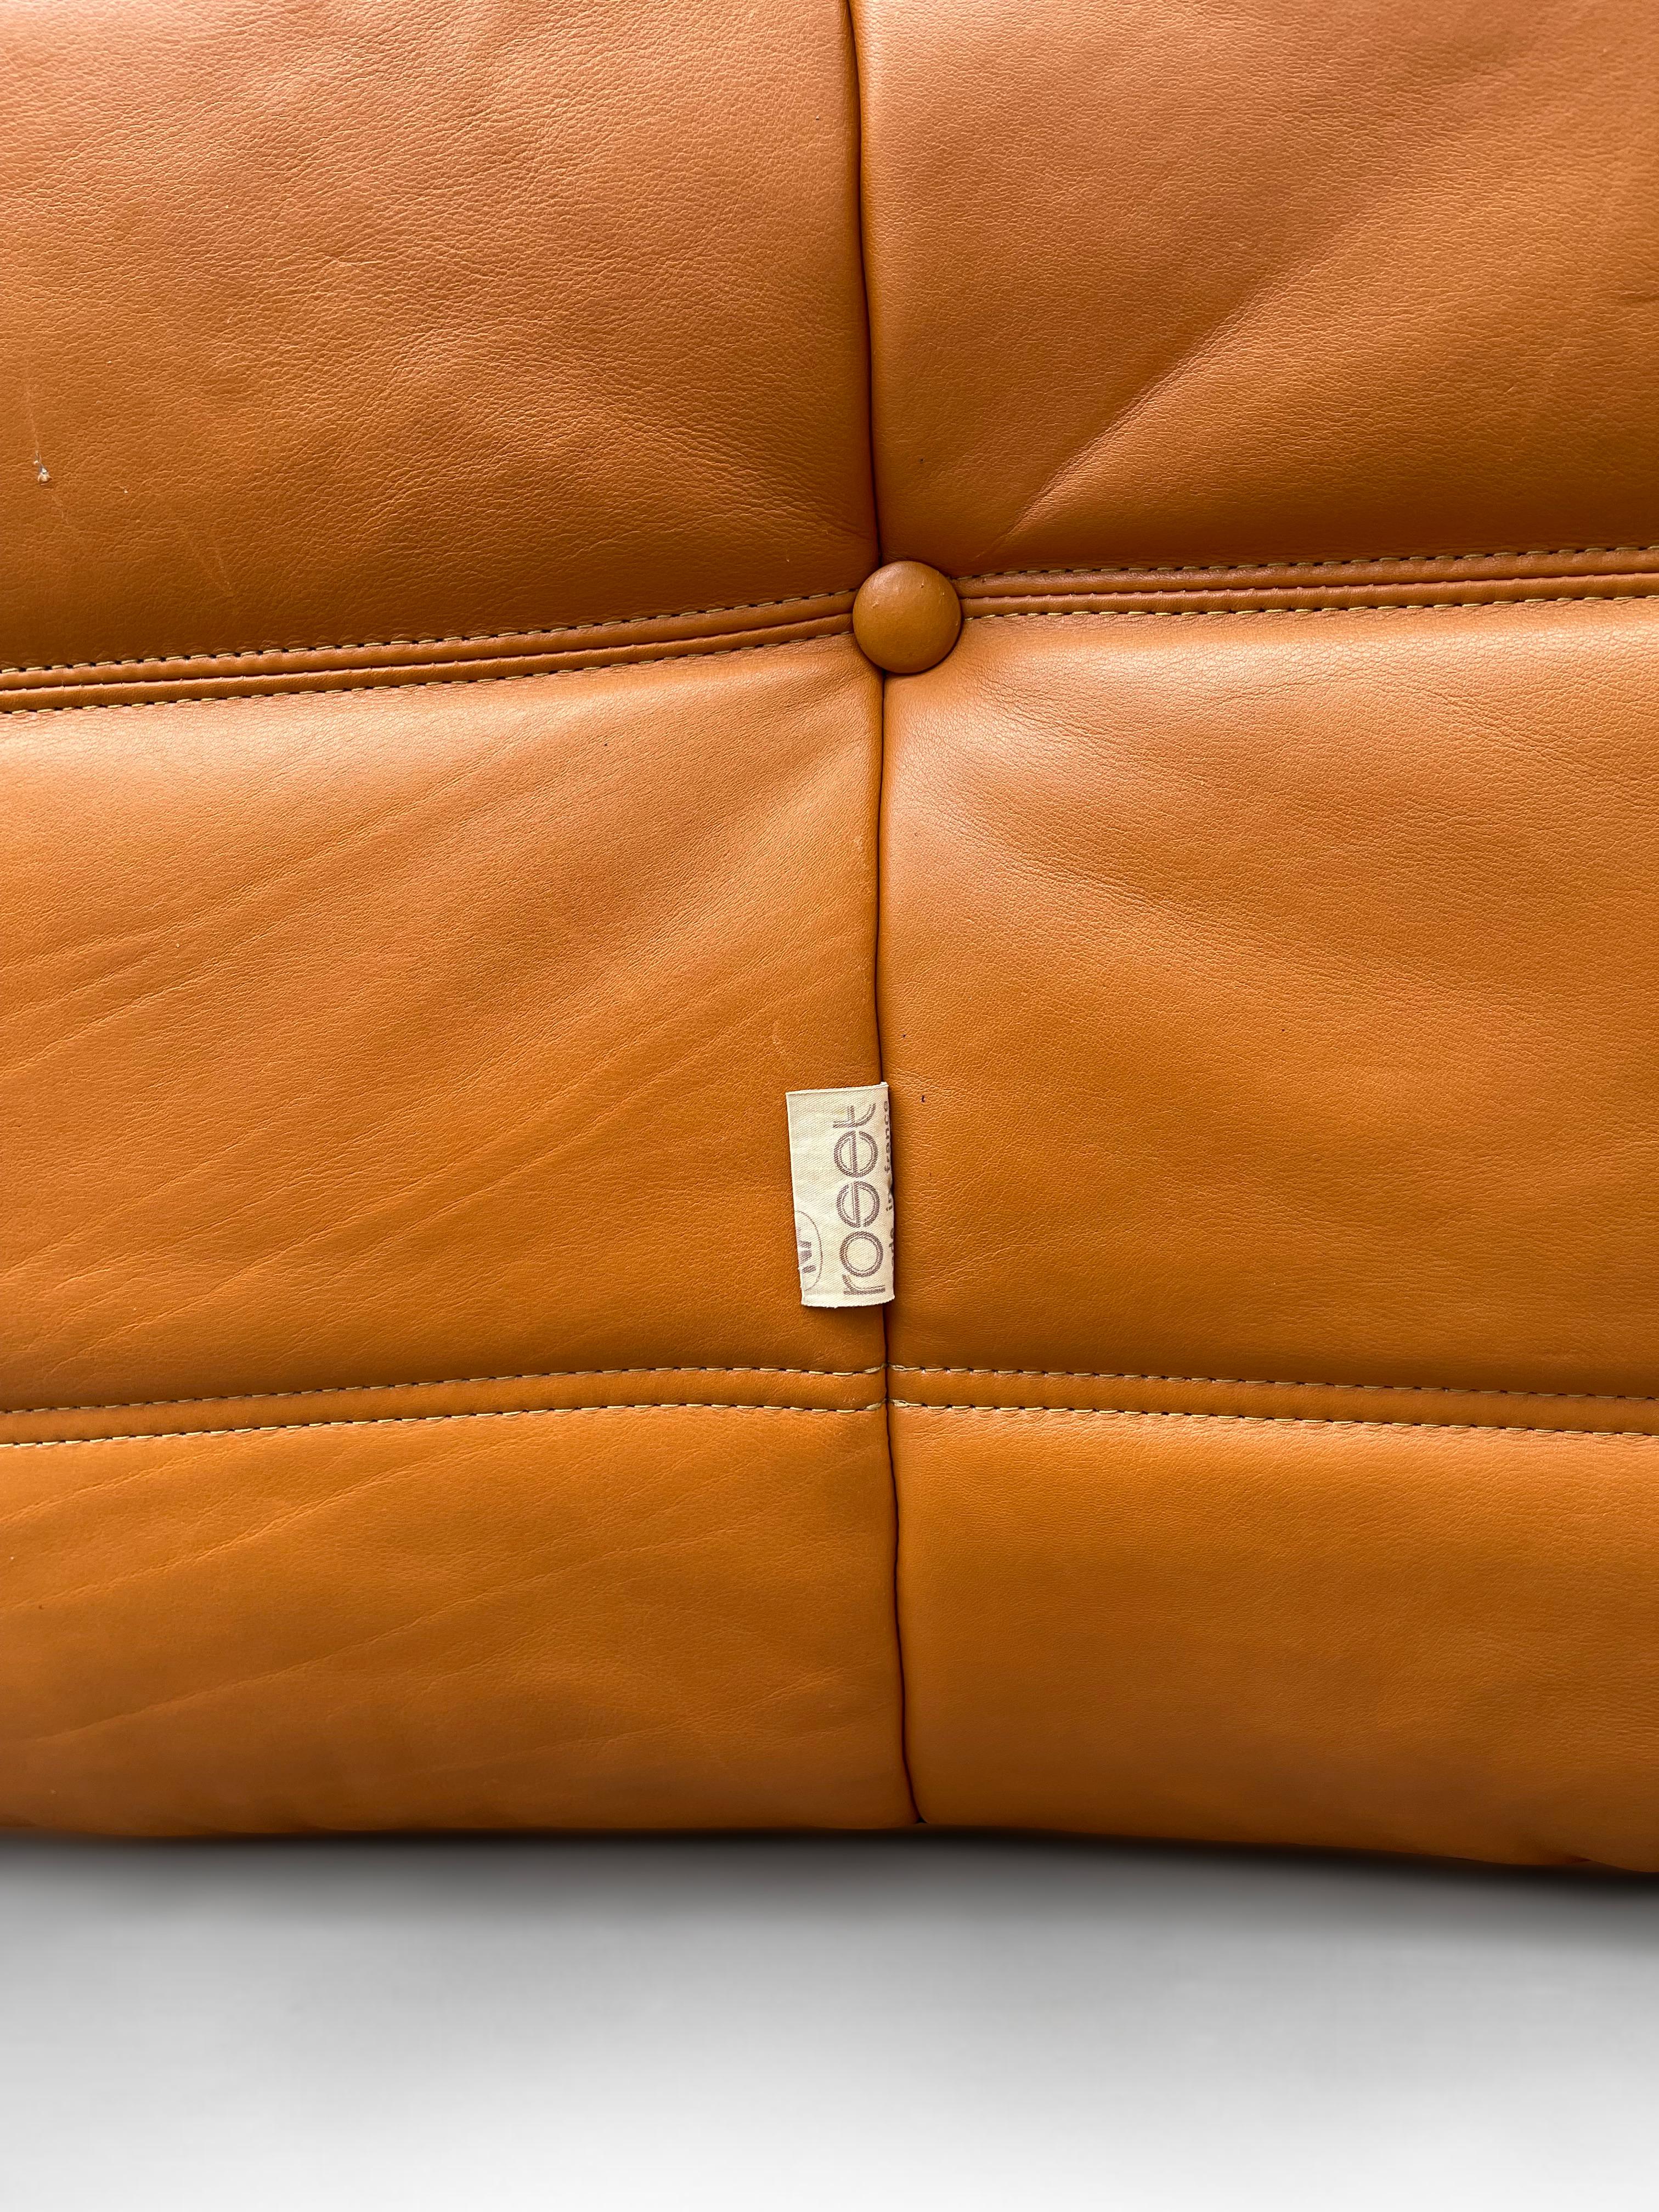 Late 20th Century Ligne Roset Togo Lounge Chairs Patinated Cognac Leather Set of Two, France 1970